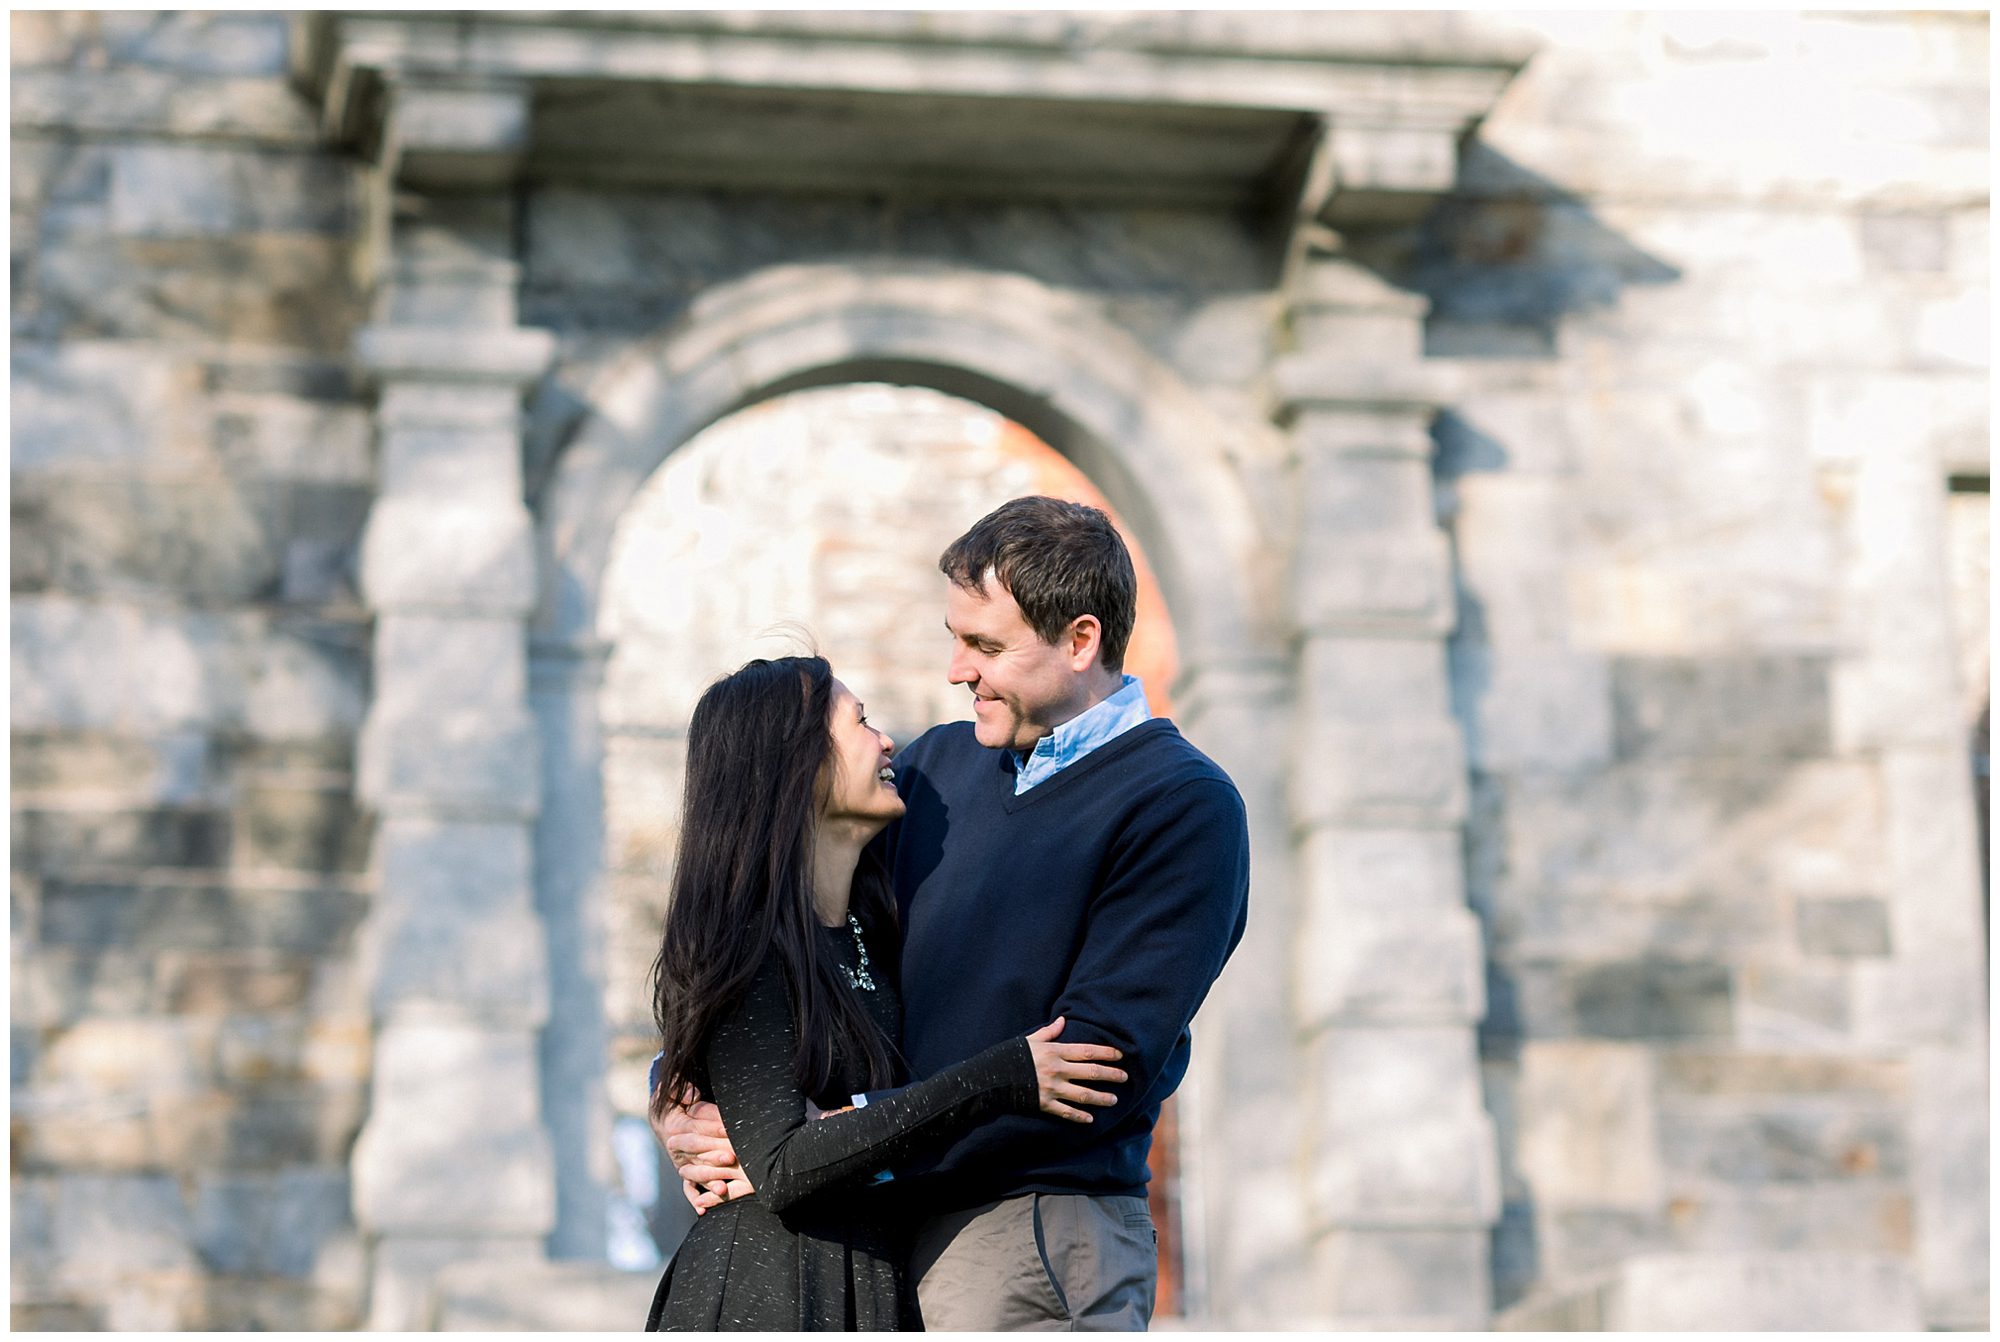 Best engagement photography locations